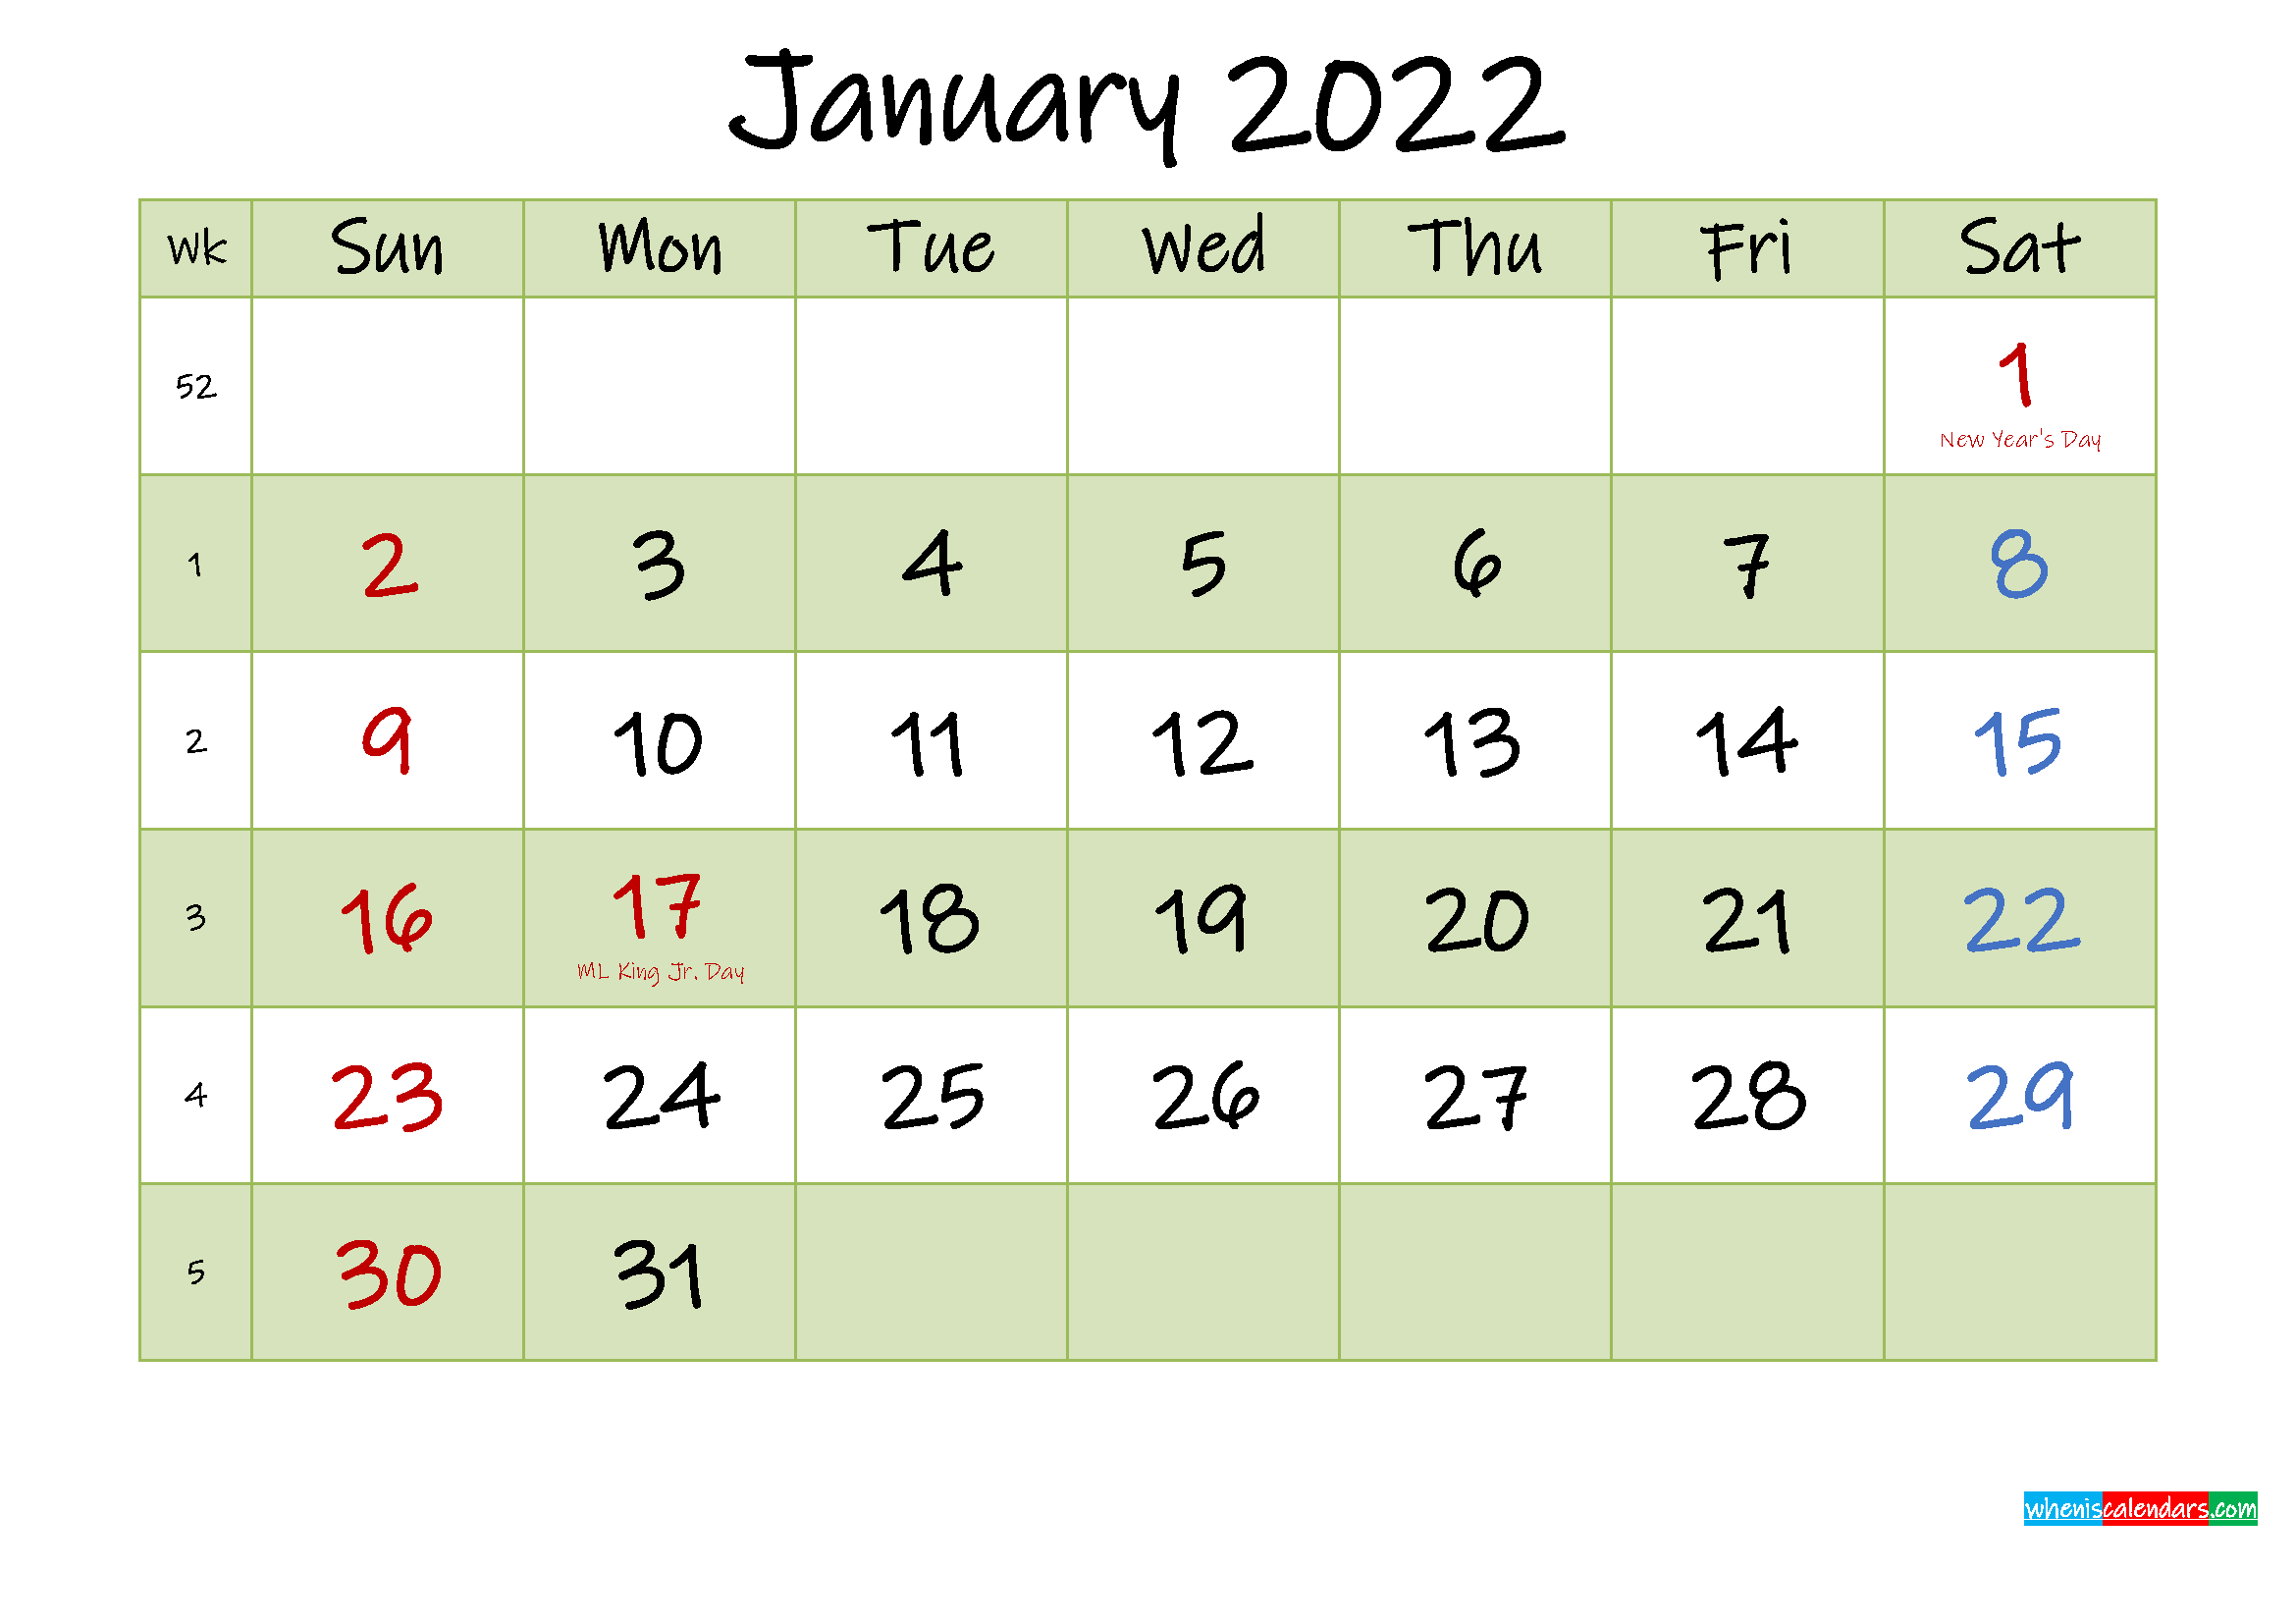 January 2022 Calendar With Holidays Printable Template No.ink22m445